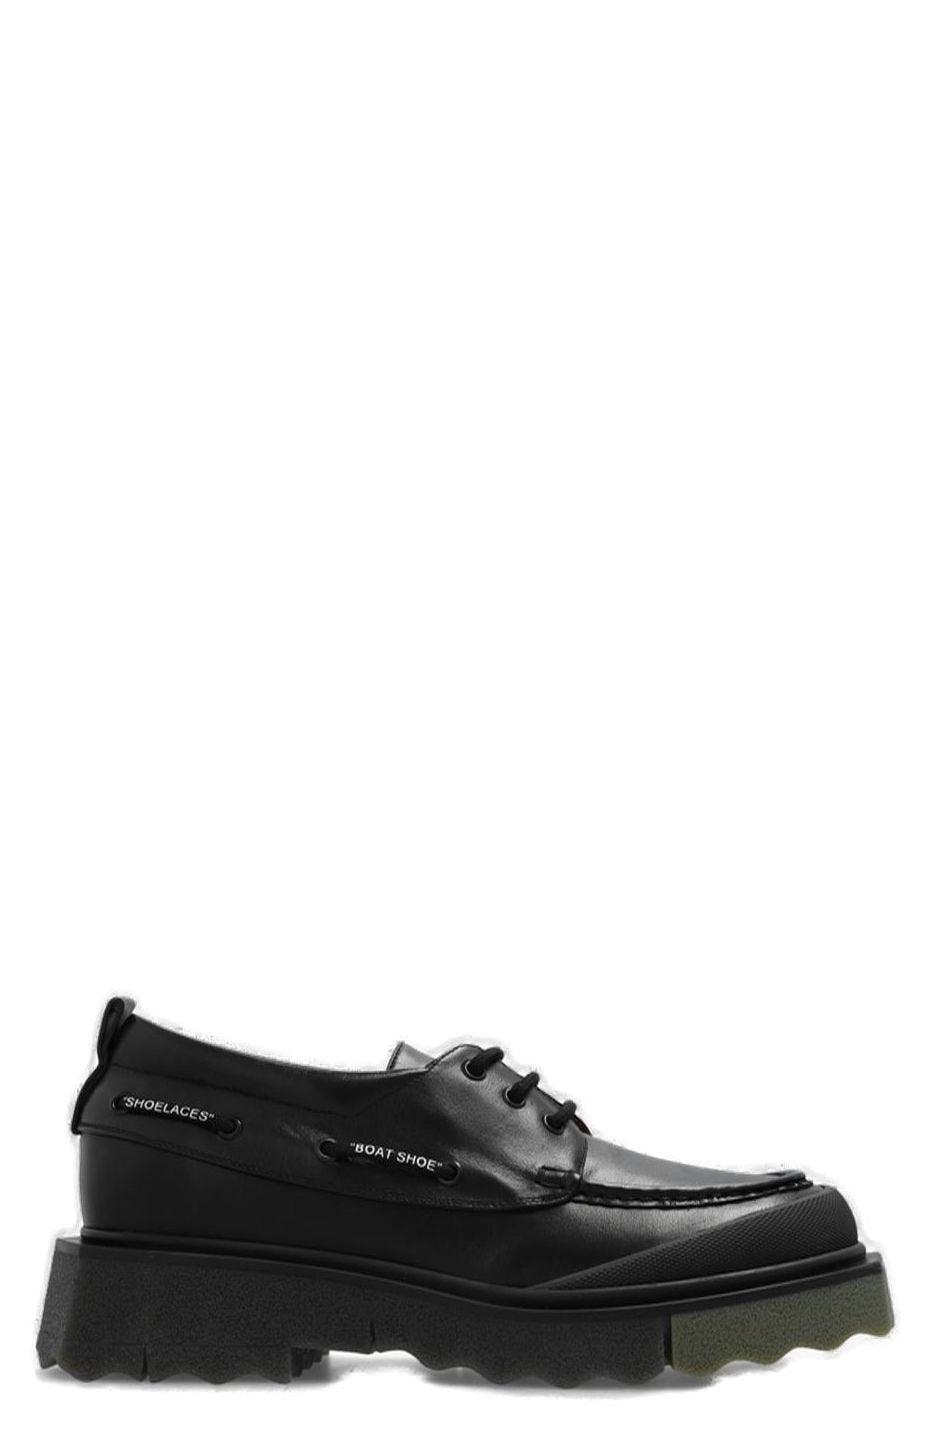 Off-White Sponge Round Toe Lace-Up Derby Shoes